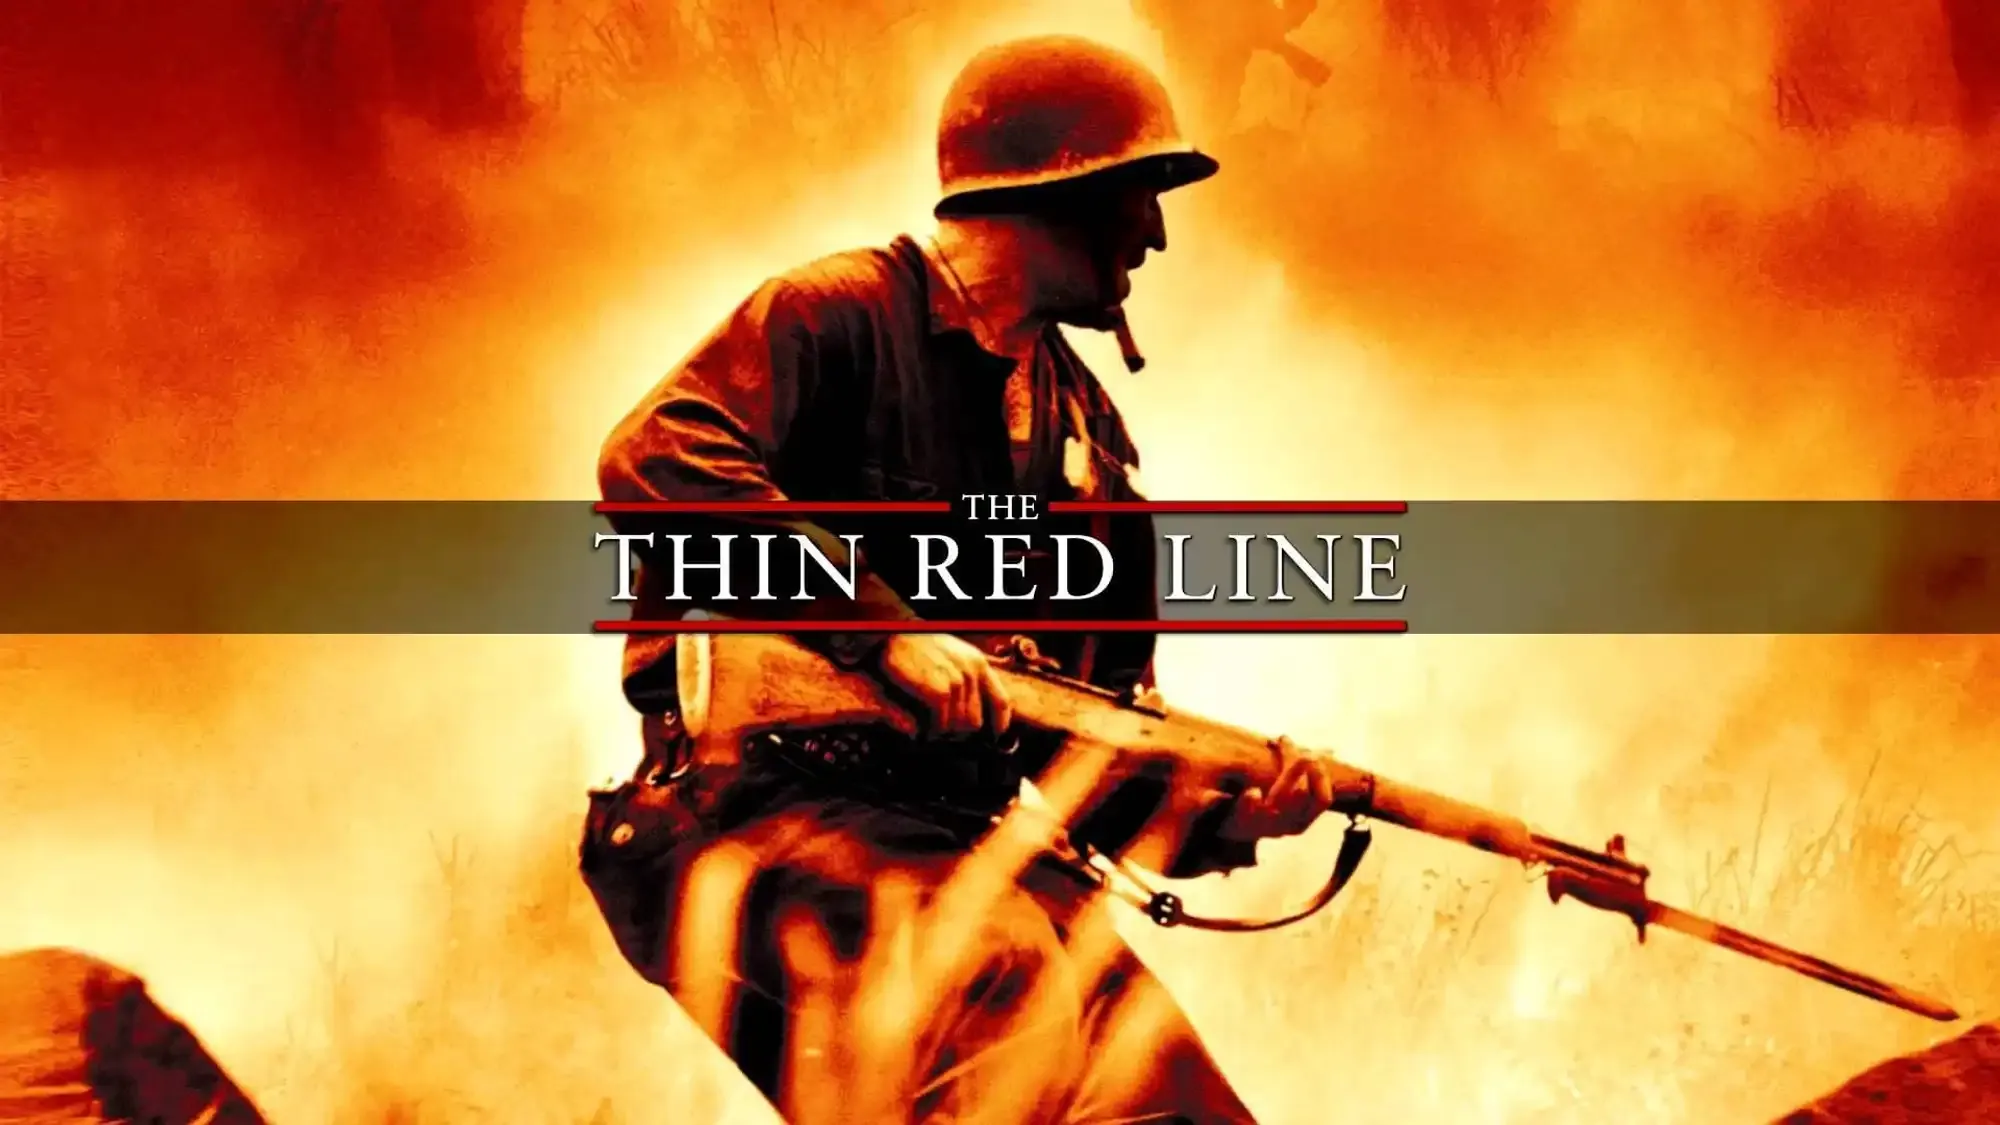 The Thin Red Line movie review